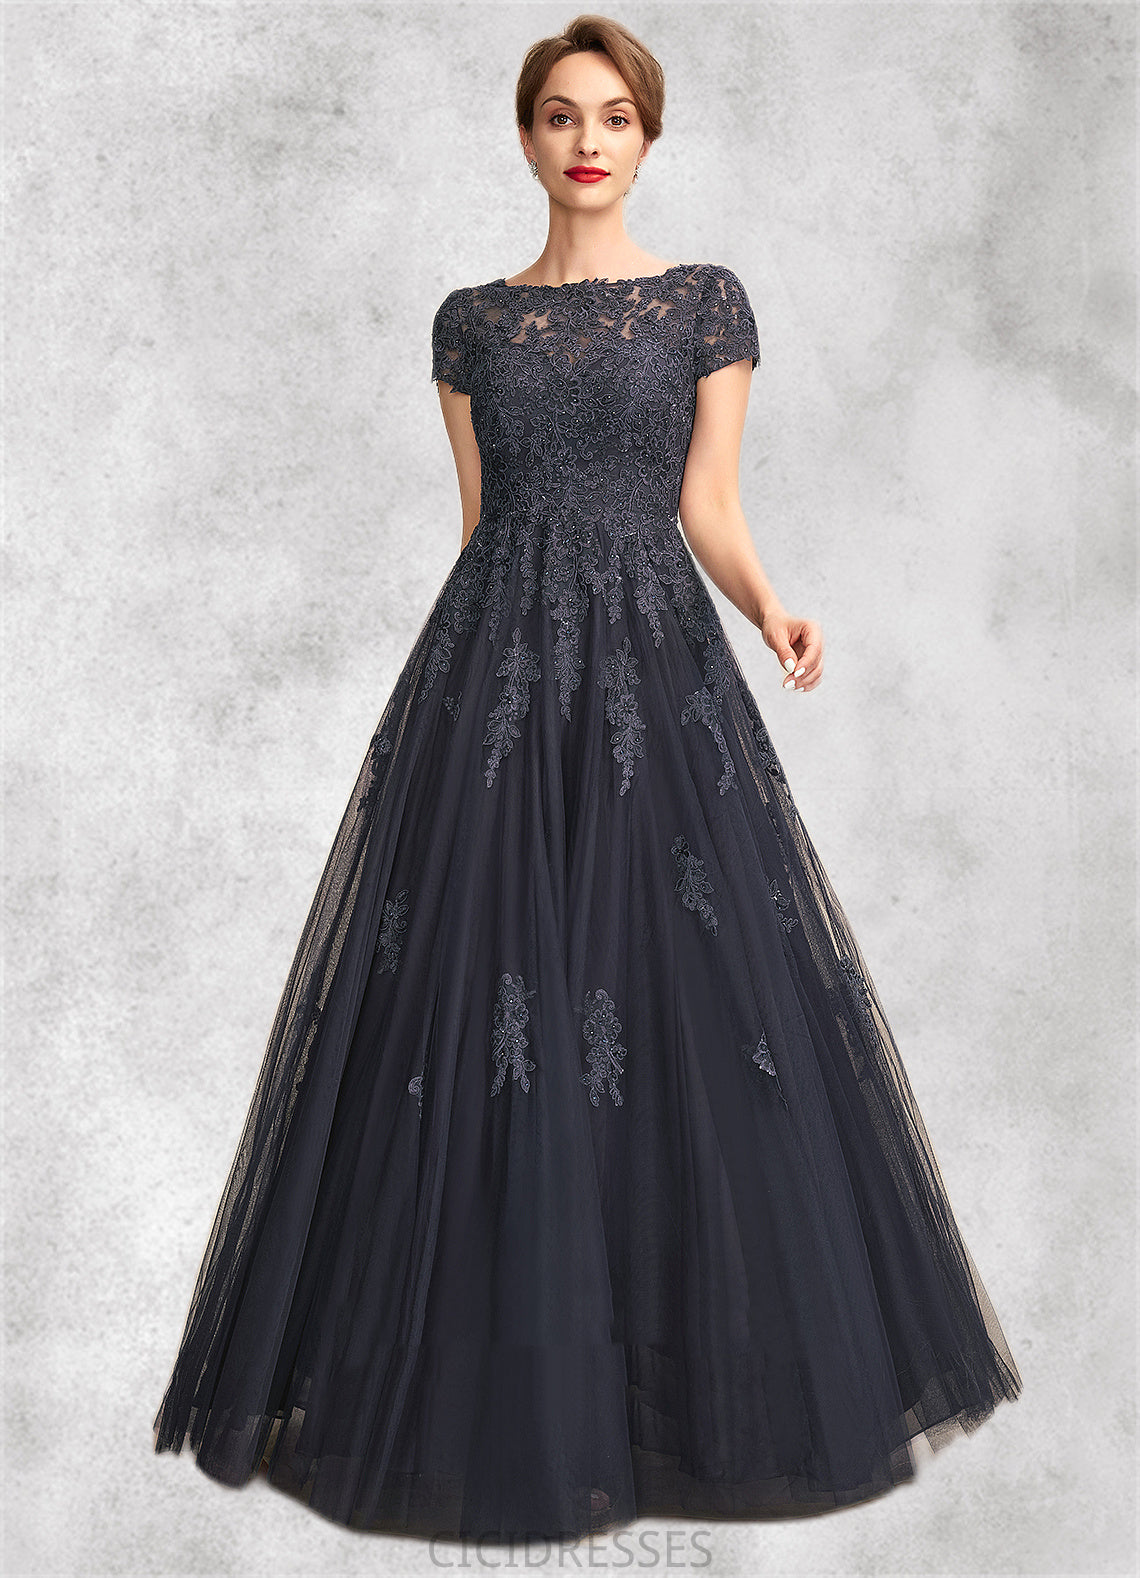 Kaitlyn A-Line Scoop Neck Floor-Length Tulle Lace Mother of the Bride Dress With Beading CIC8126P0015029